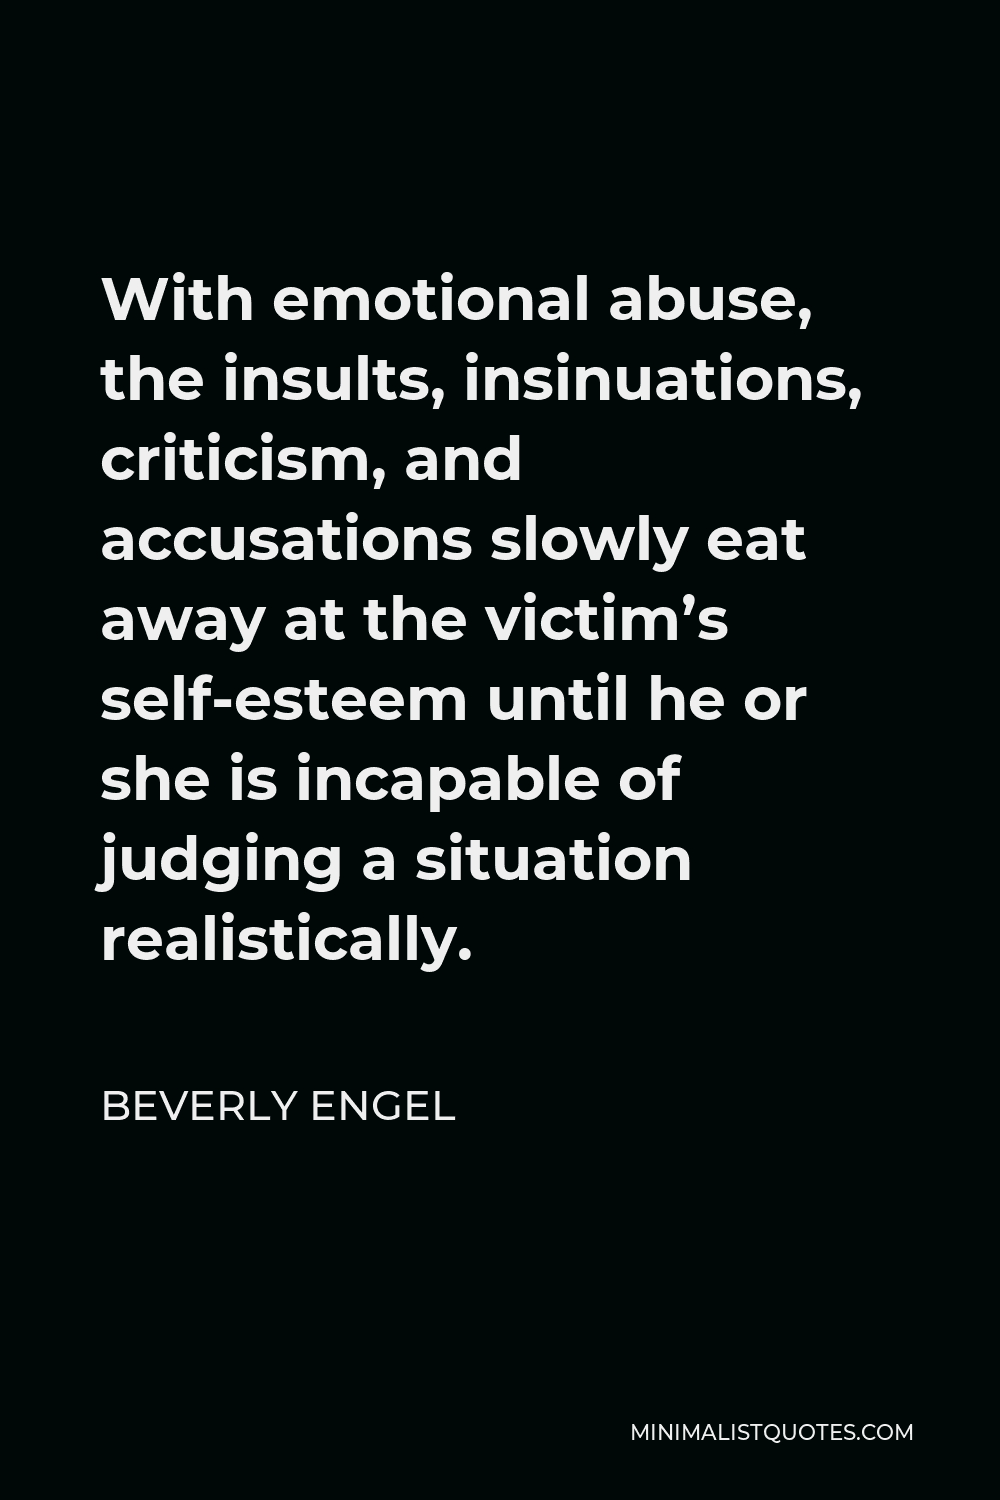 Beverly Engel Quote - With emotional abuse, the insults, insinuations, criticism, and accusations slowly eat away at the victim’s self-esteem until he or she is incapable of judging a situation realistically.